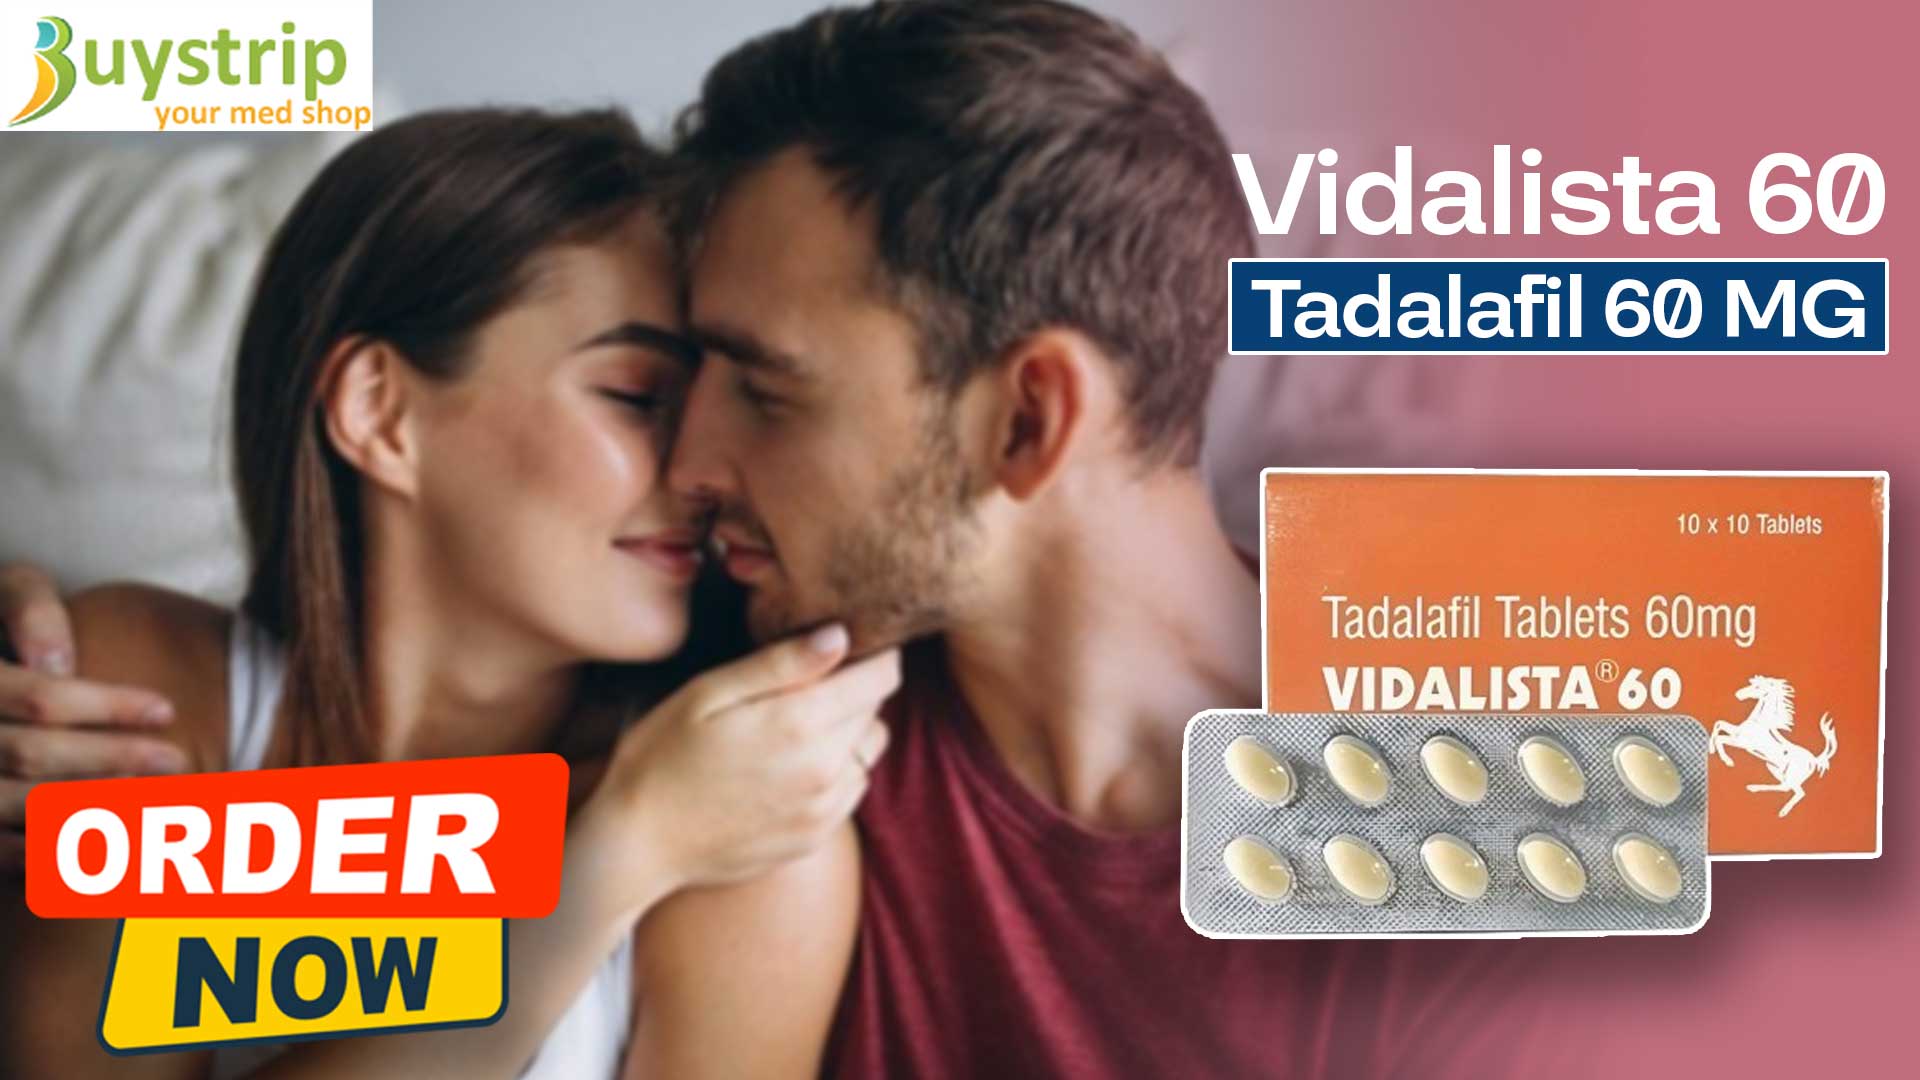 Vidalista 60: Enhancing Intimate Moments with Extended Effectiveness